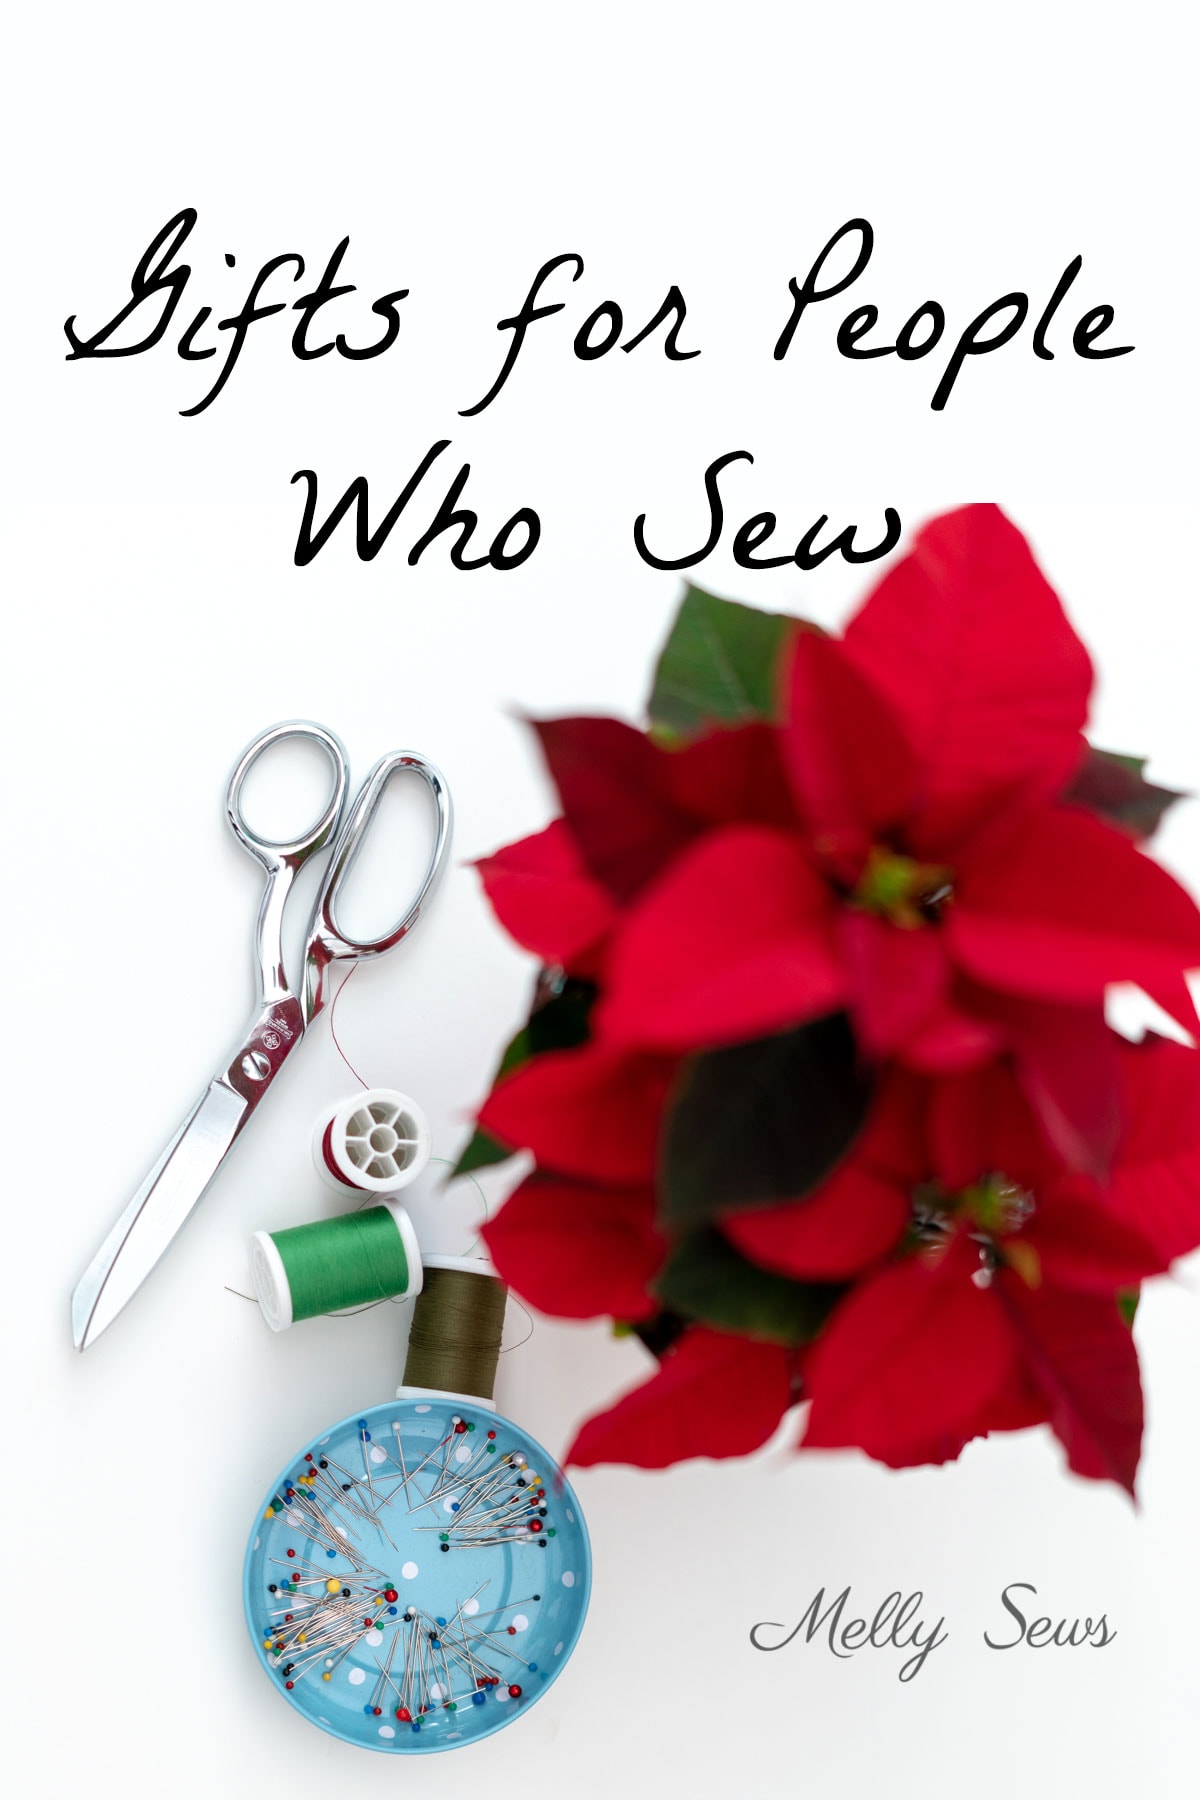 Top Gifts for Sewing Enthusiasts from Scissors to Cricut - Rae Gun